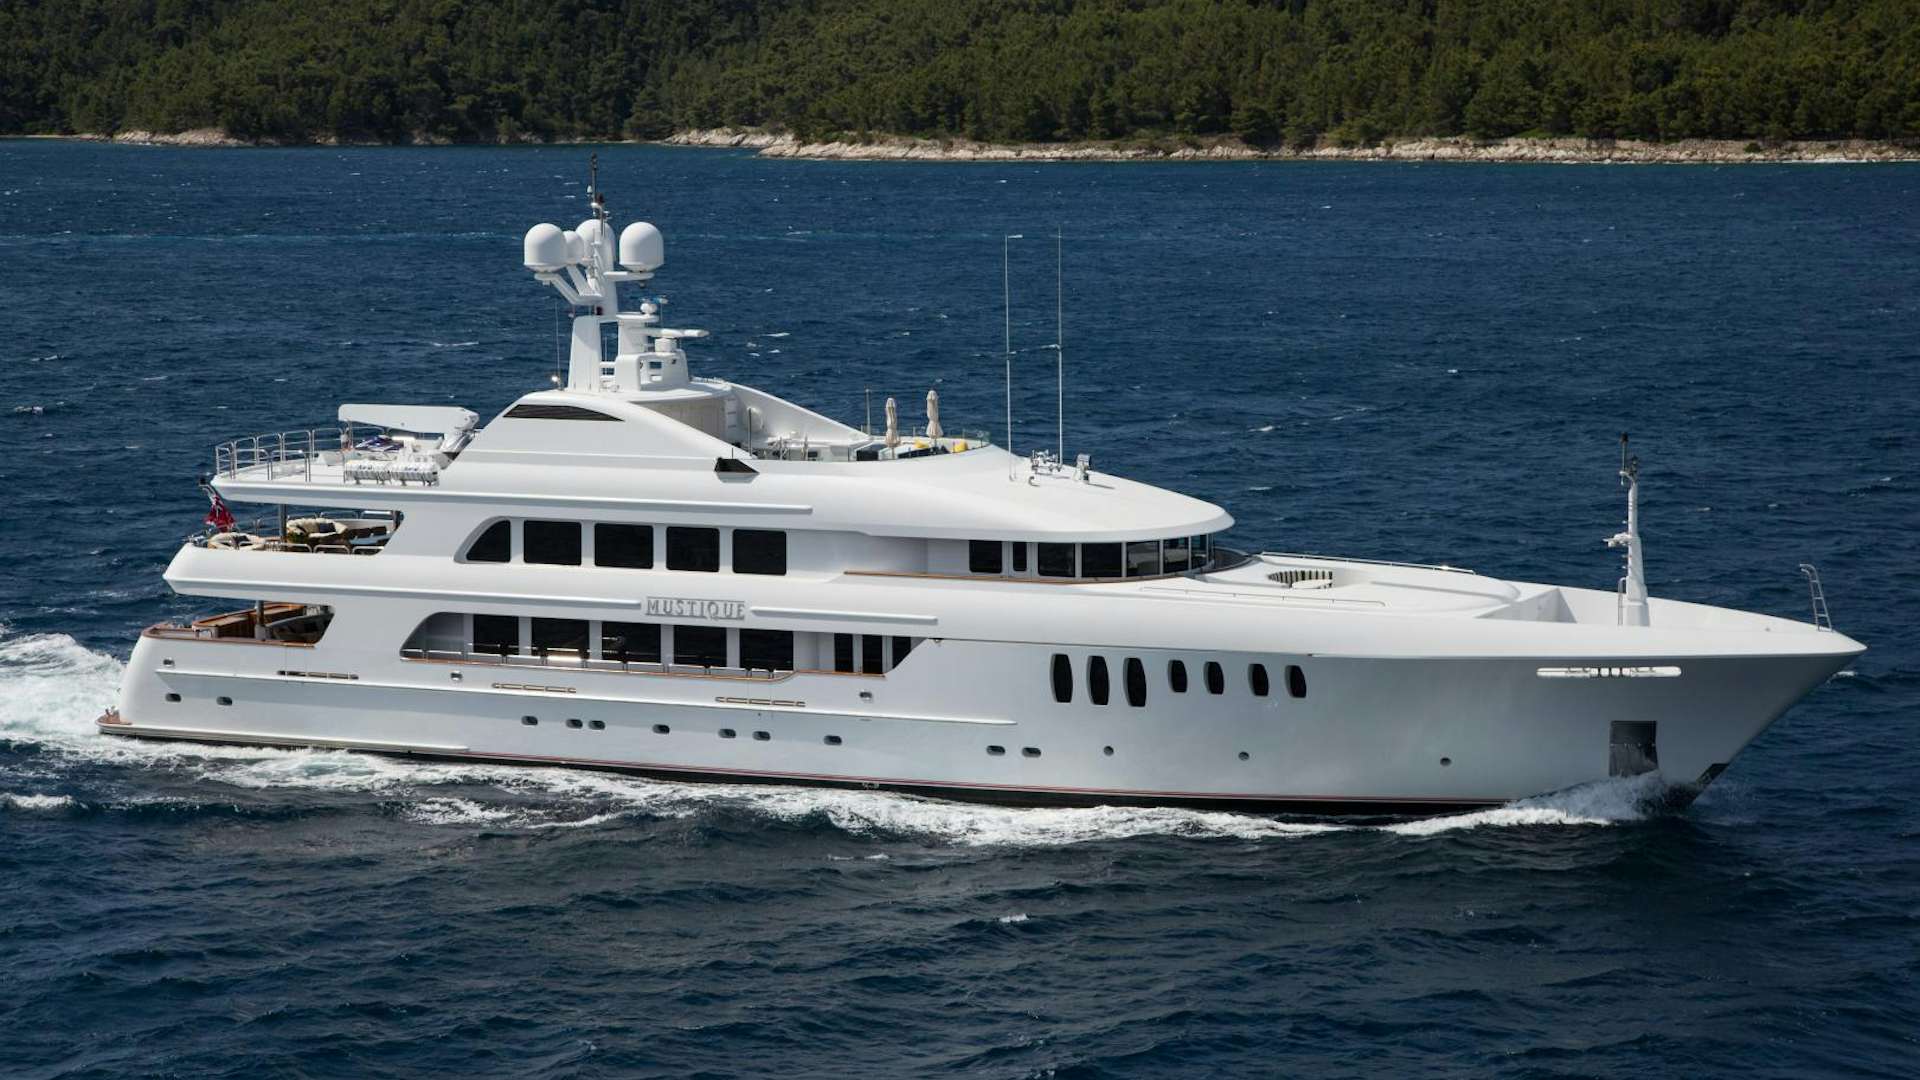 Watch Video for MUSTIQUE Yacht for Sale